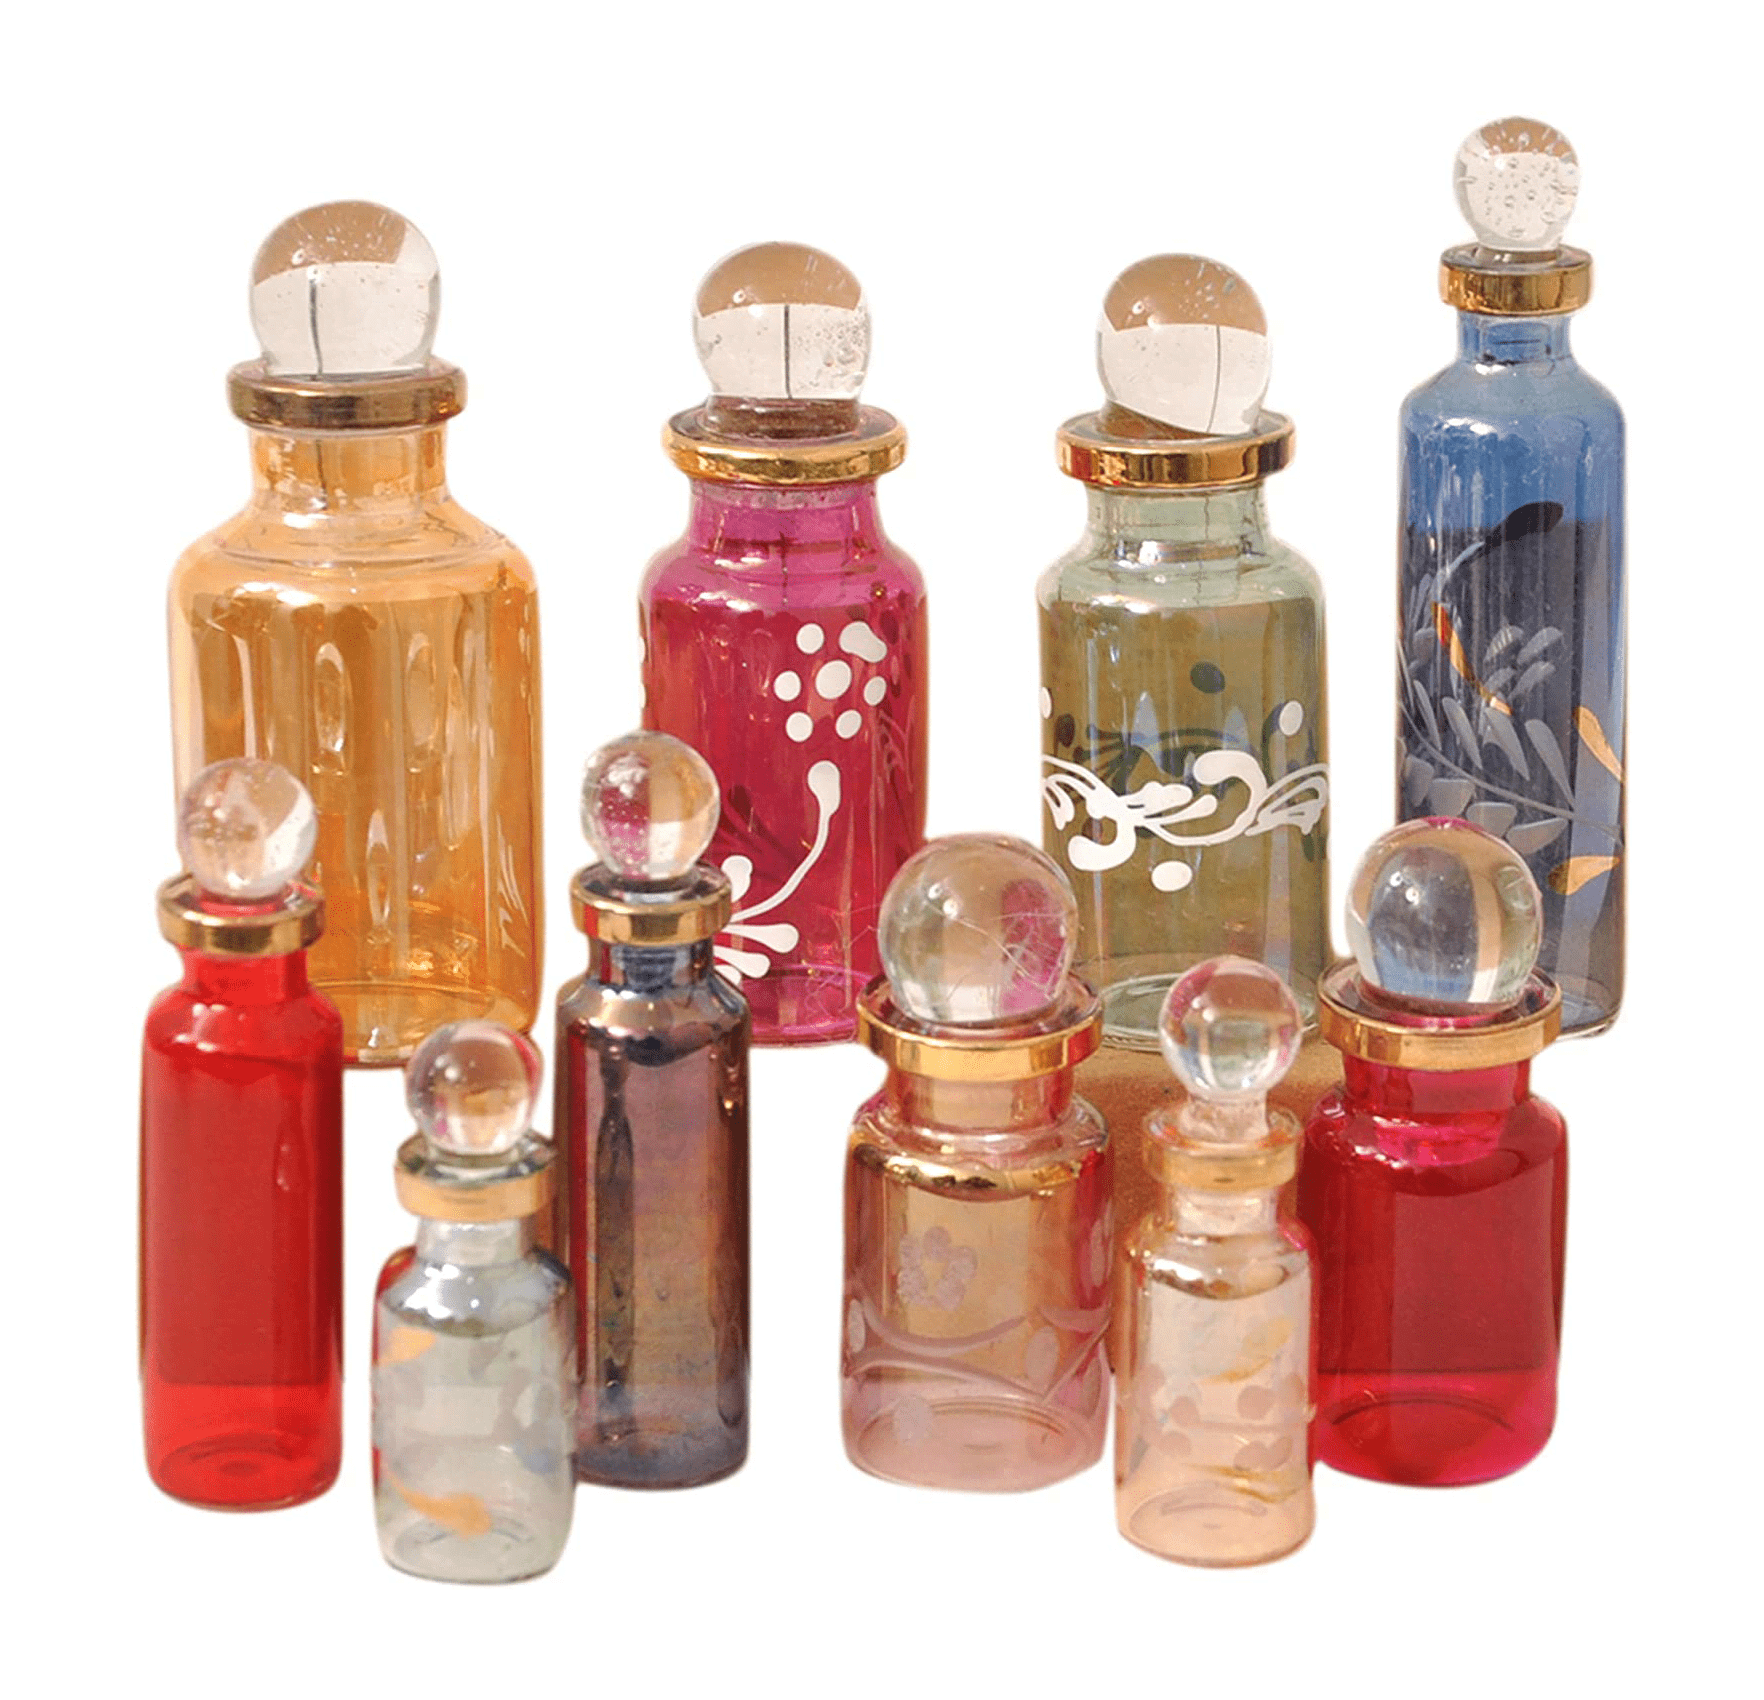 A group of small glass bottles with different colors - Witchcore